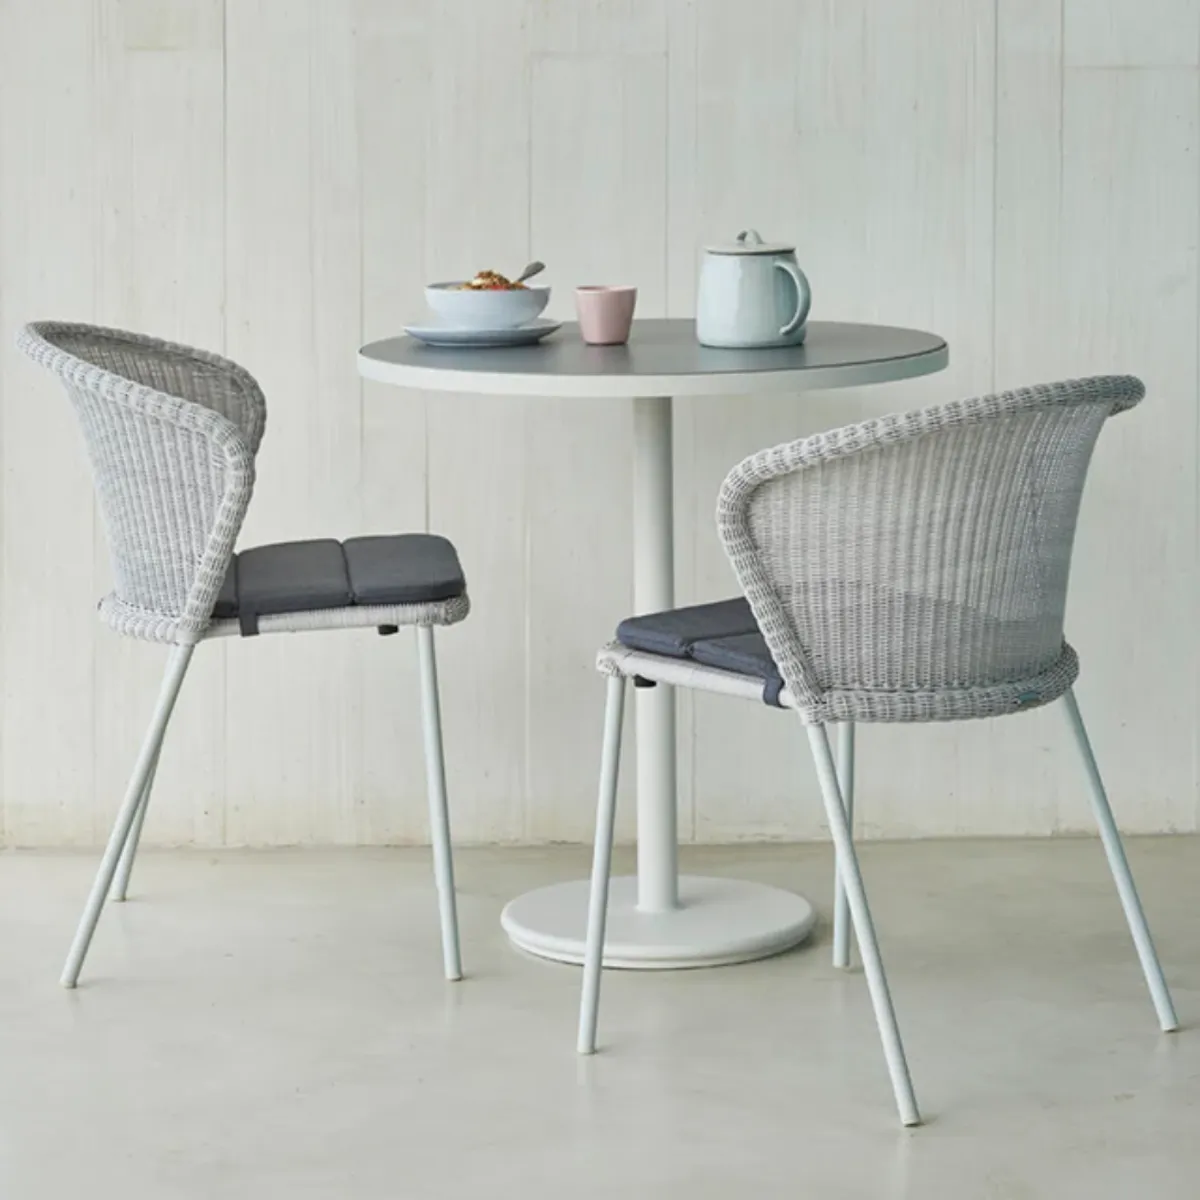 Tropez stacking chair 9